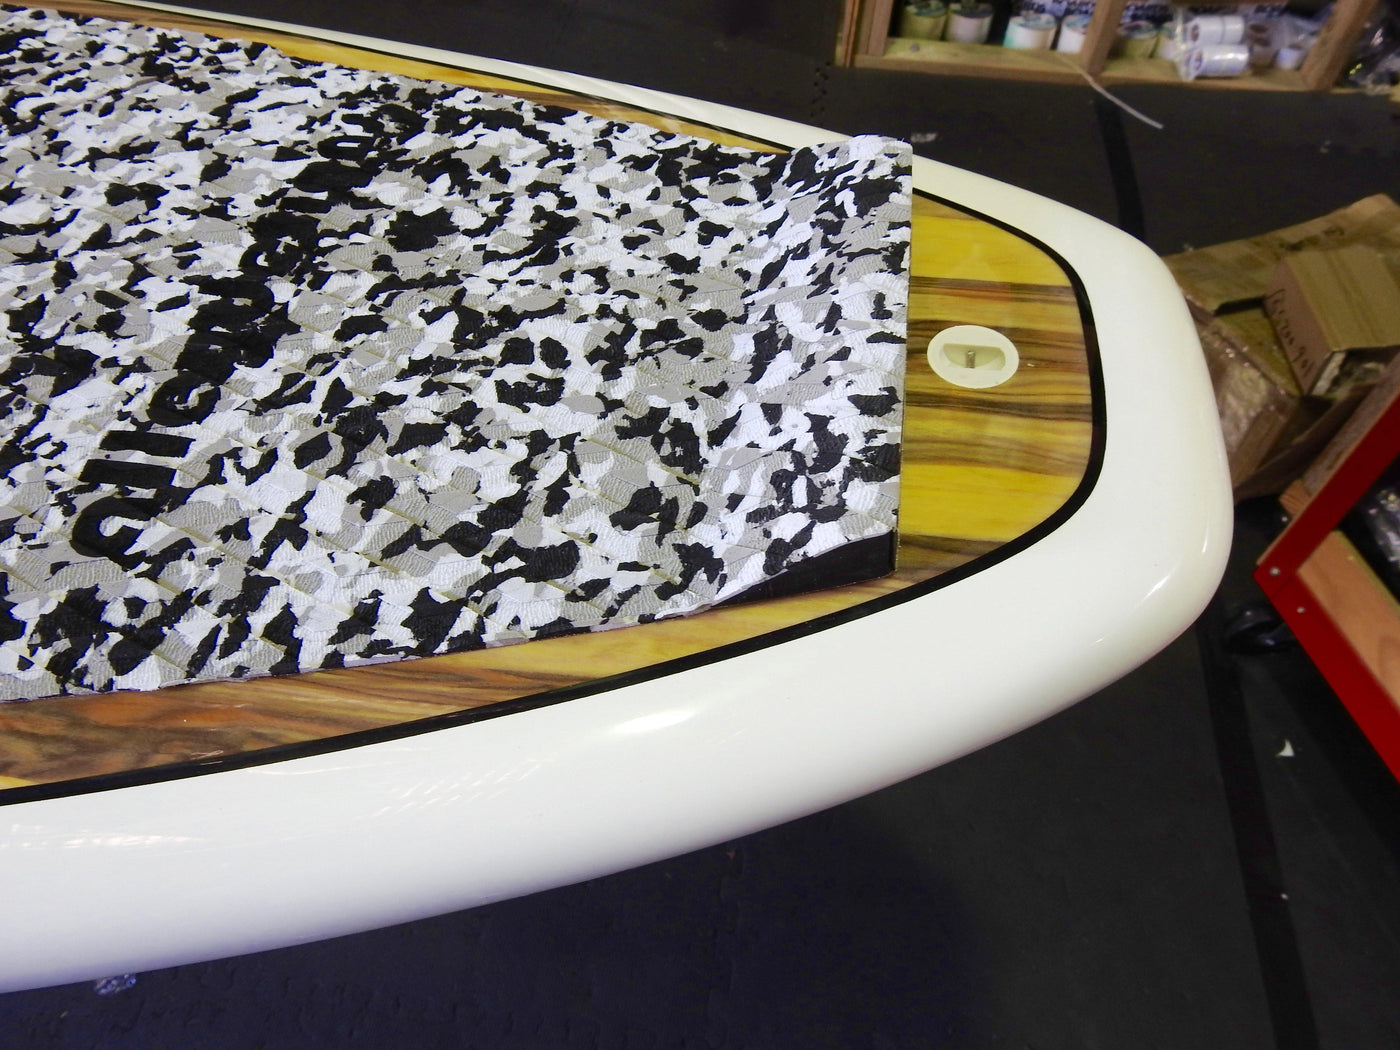 10' x 32" Timber White Turtle Classic Alleydesigns SUP 9KG - Alleydesigns  Pty Ltd                                             ABN: 44165571264